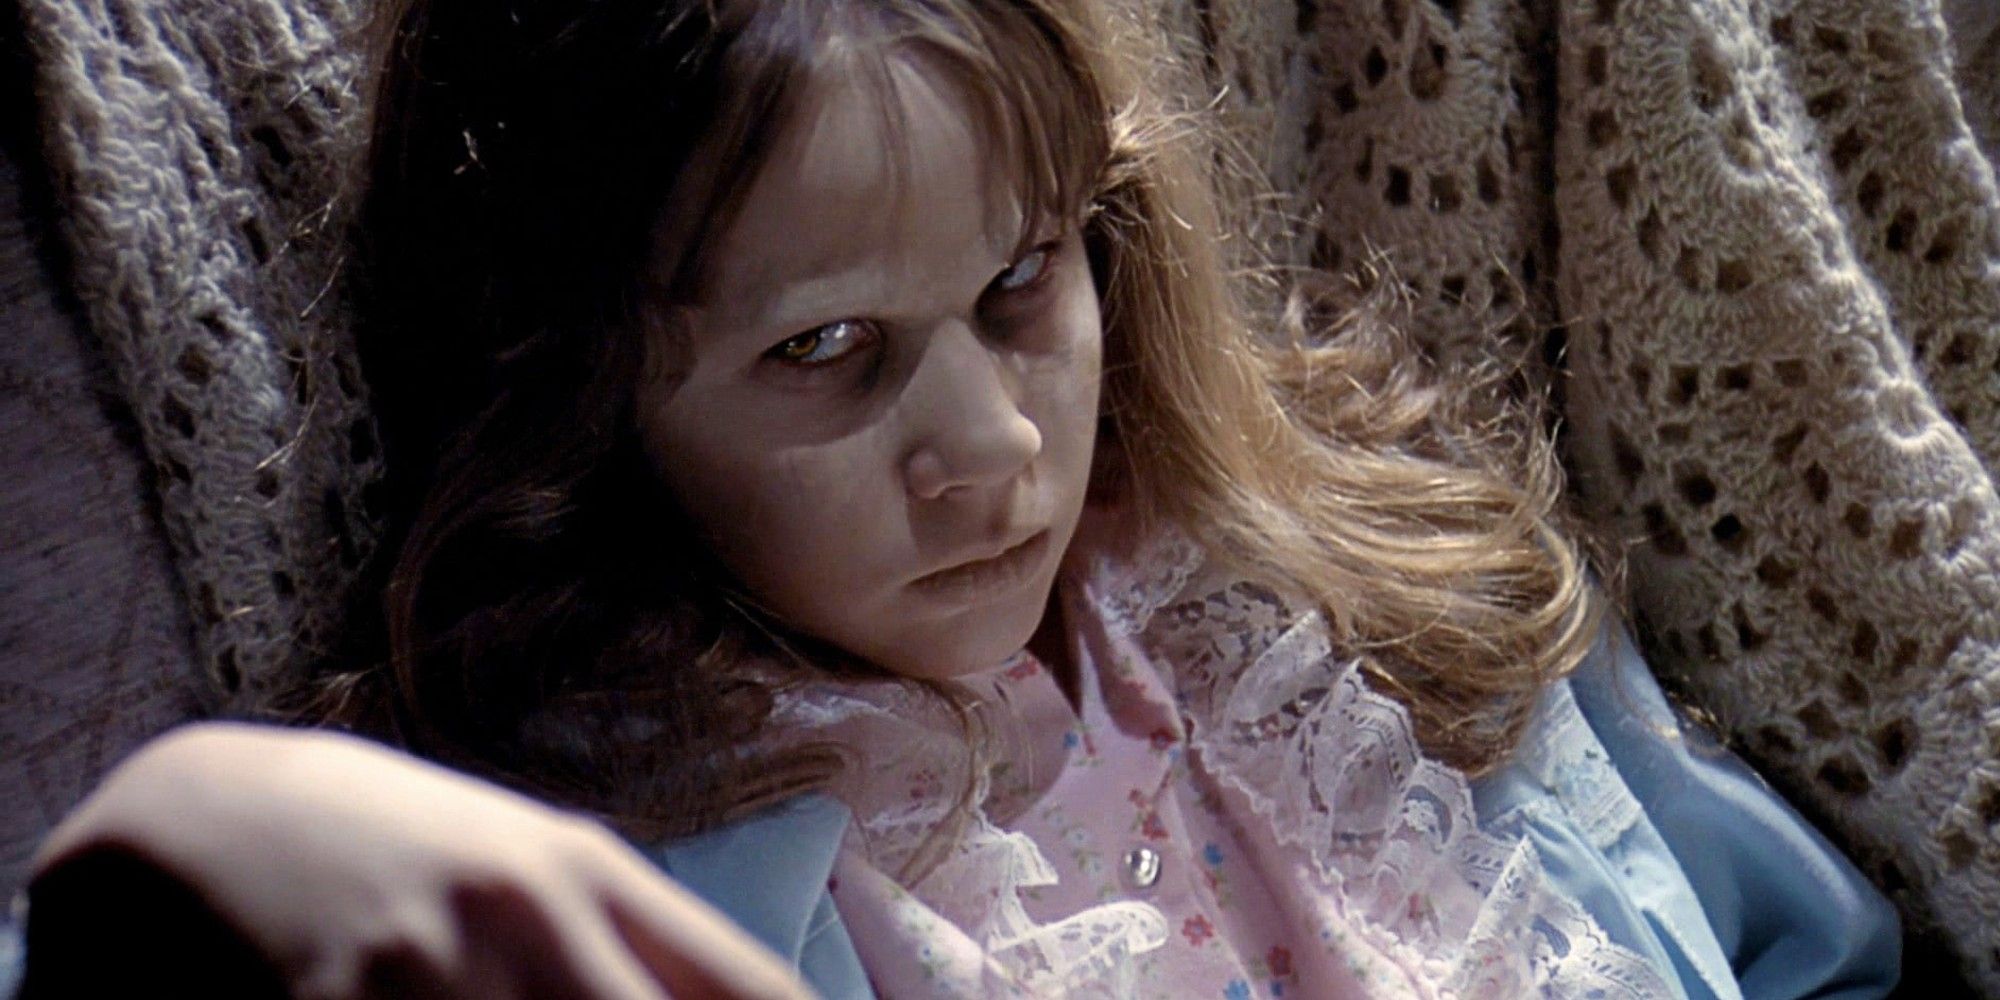 The Exorcist, a movie that excels in manipulating emotions.